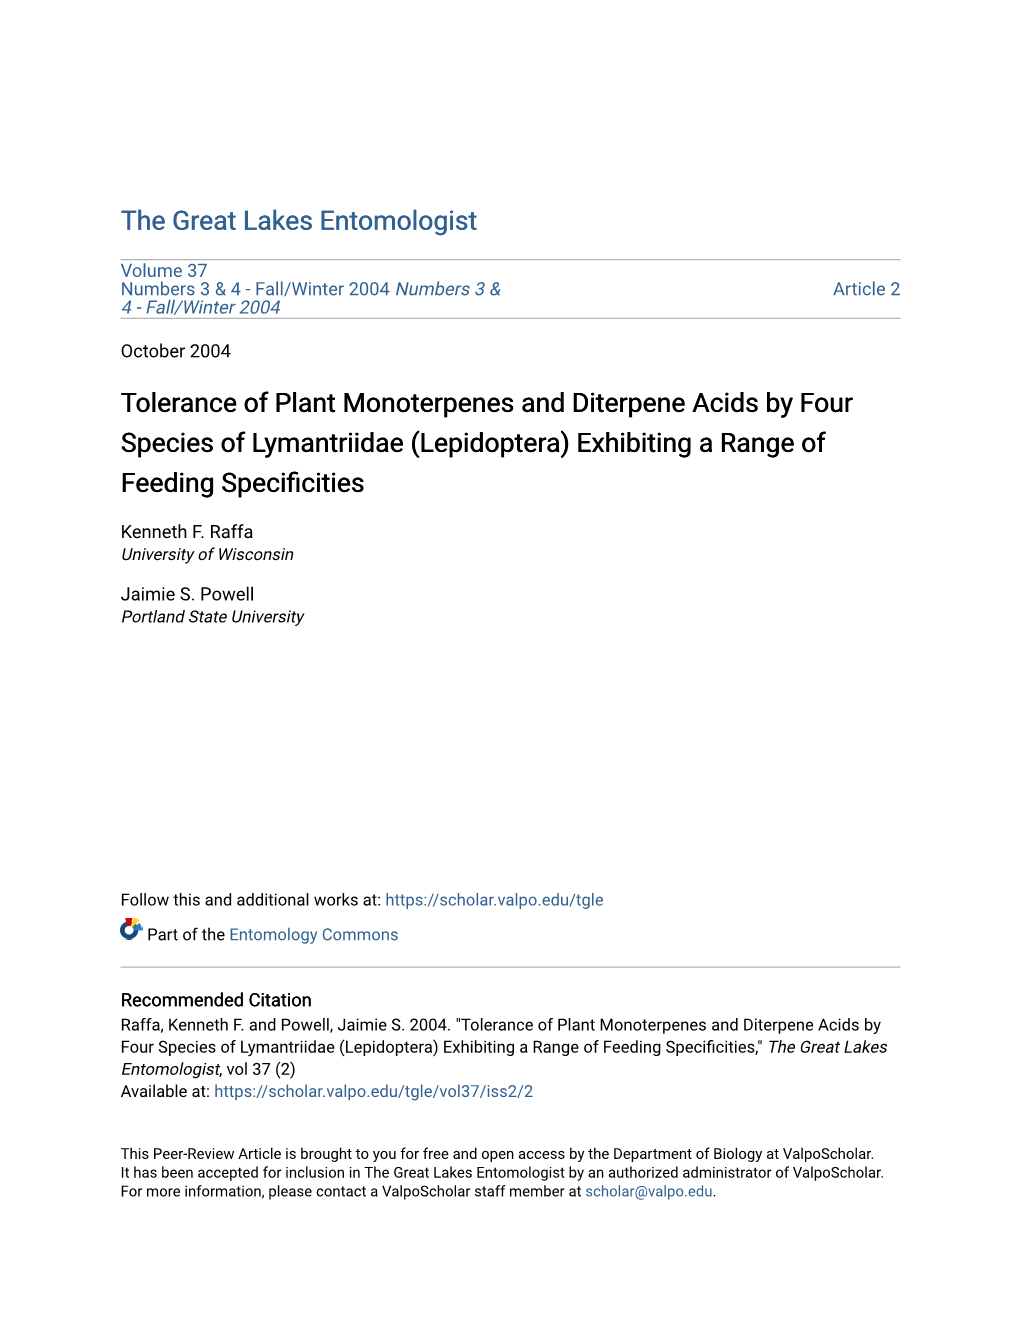 Tolerance of Plant Monoterpenes and Diterpene Acids by Four Species of Lymantriidae (Lepidoptera) Exhibiting a Range of Feeding Specificities